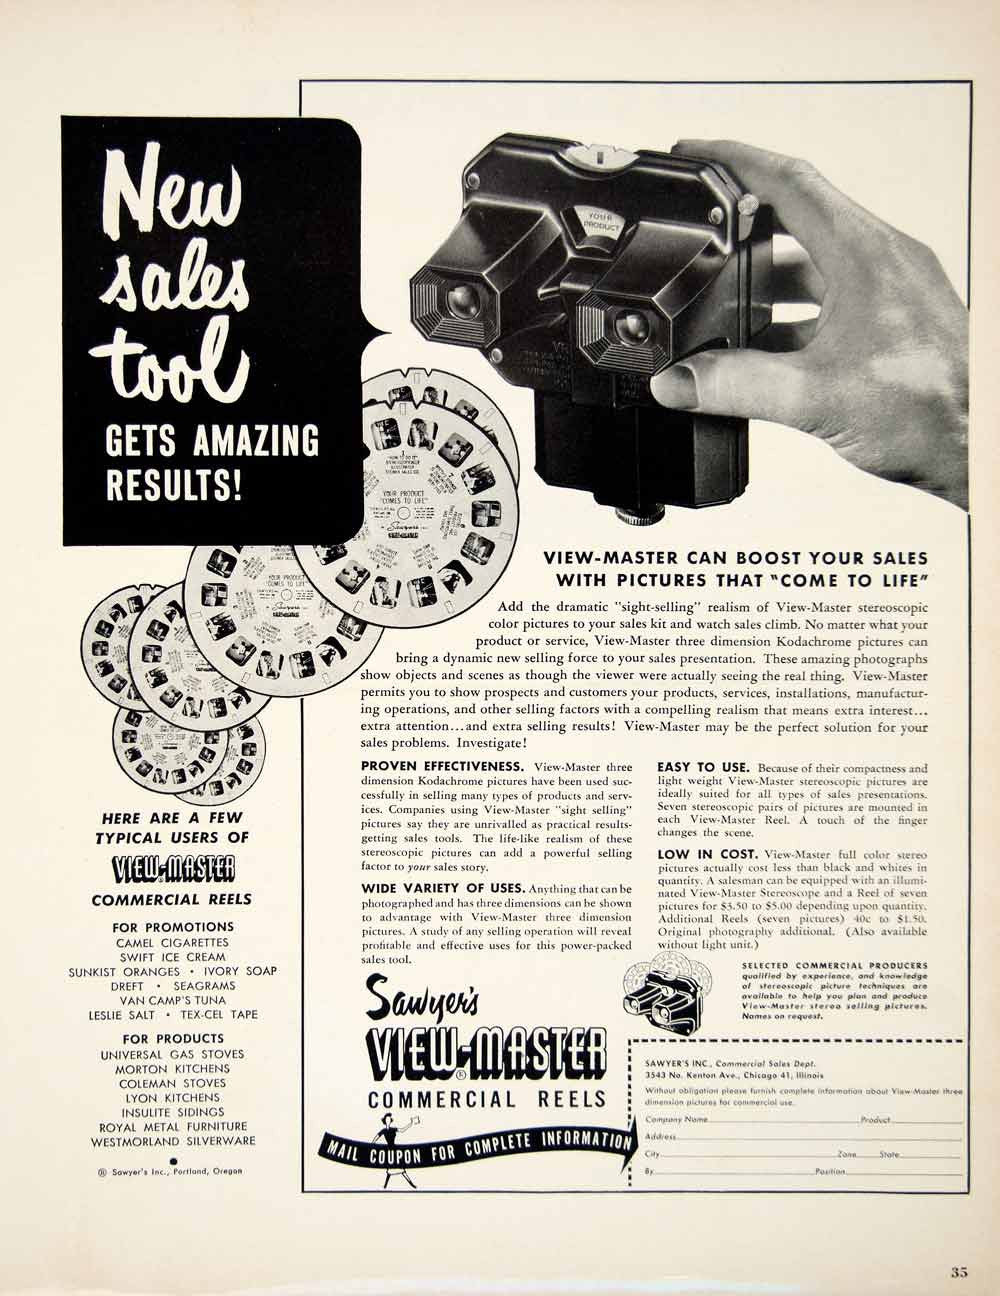 Vintage 1950s Sawyer's VIEWMASTER VIEWER and REELS